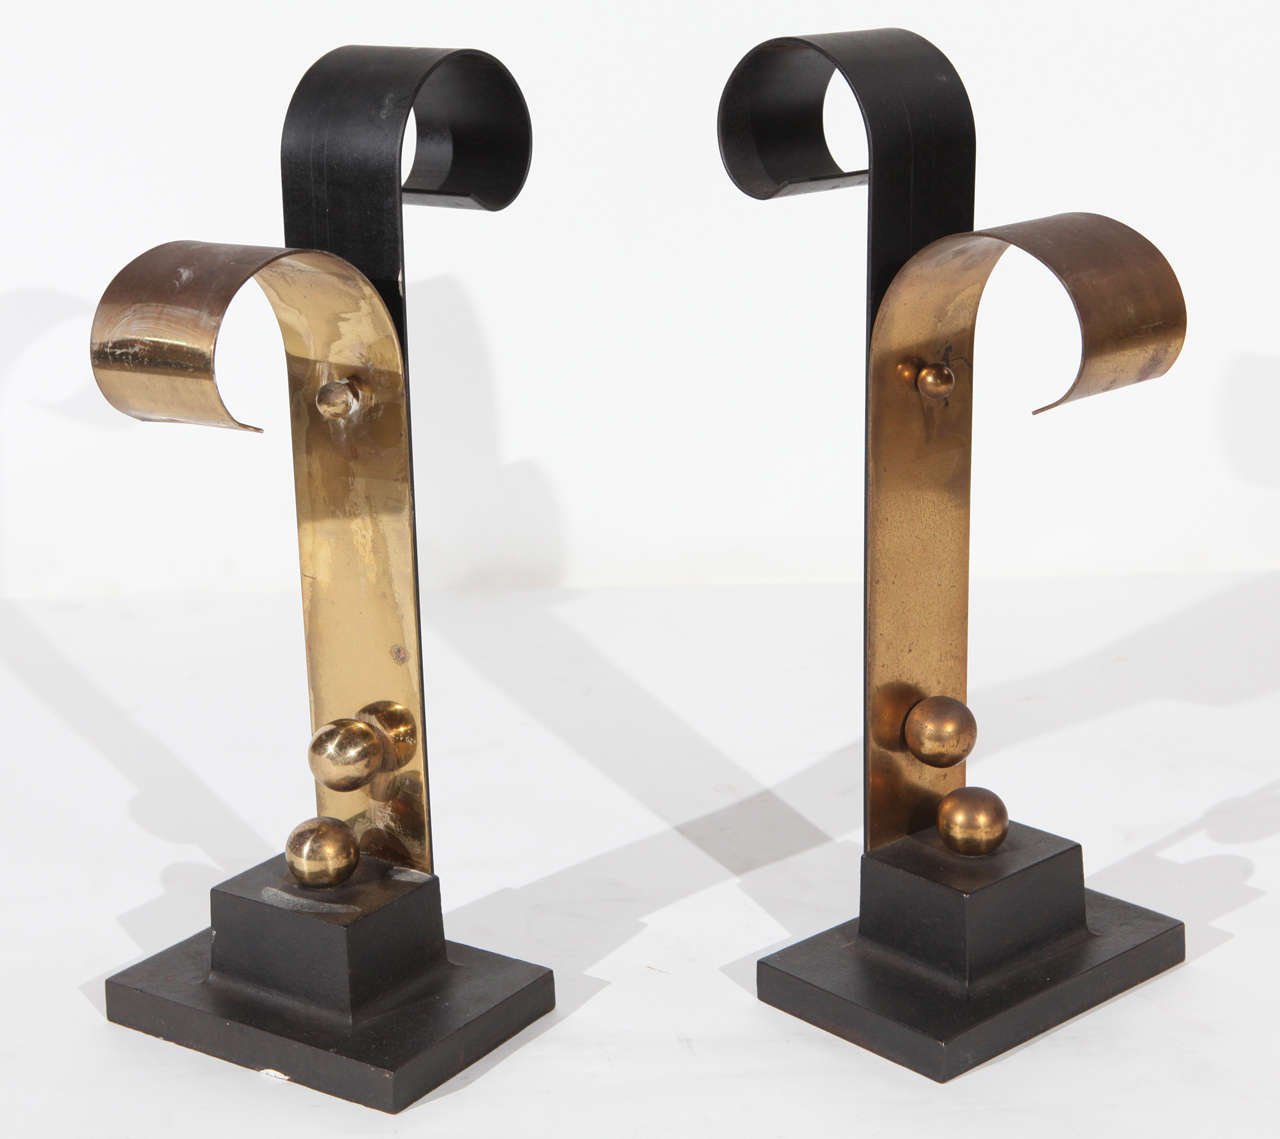 An amazing pair of vintage Richard Neutra andirons from a famous house near UCLA located at 234 Hilgard Avenue in Westwood. Made of brass and wrought iron.